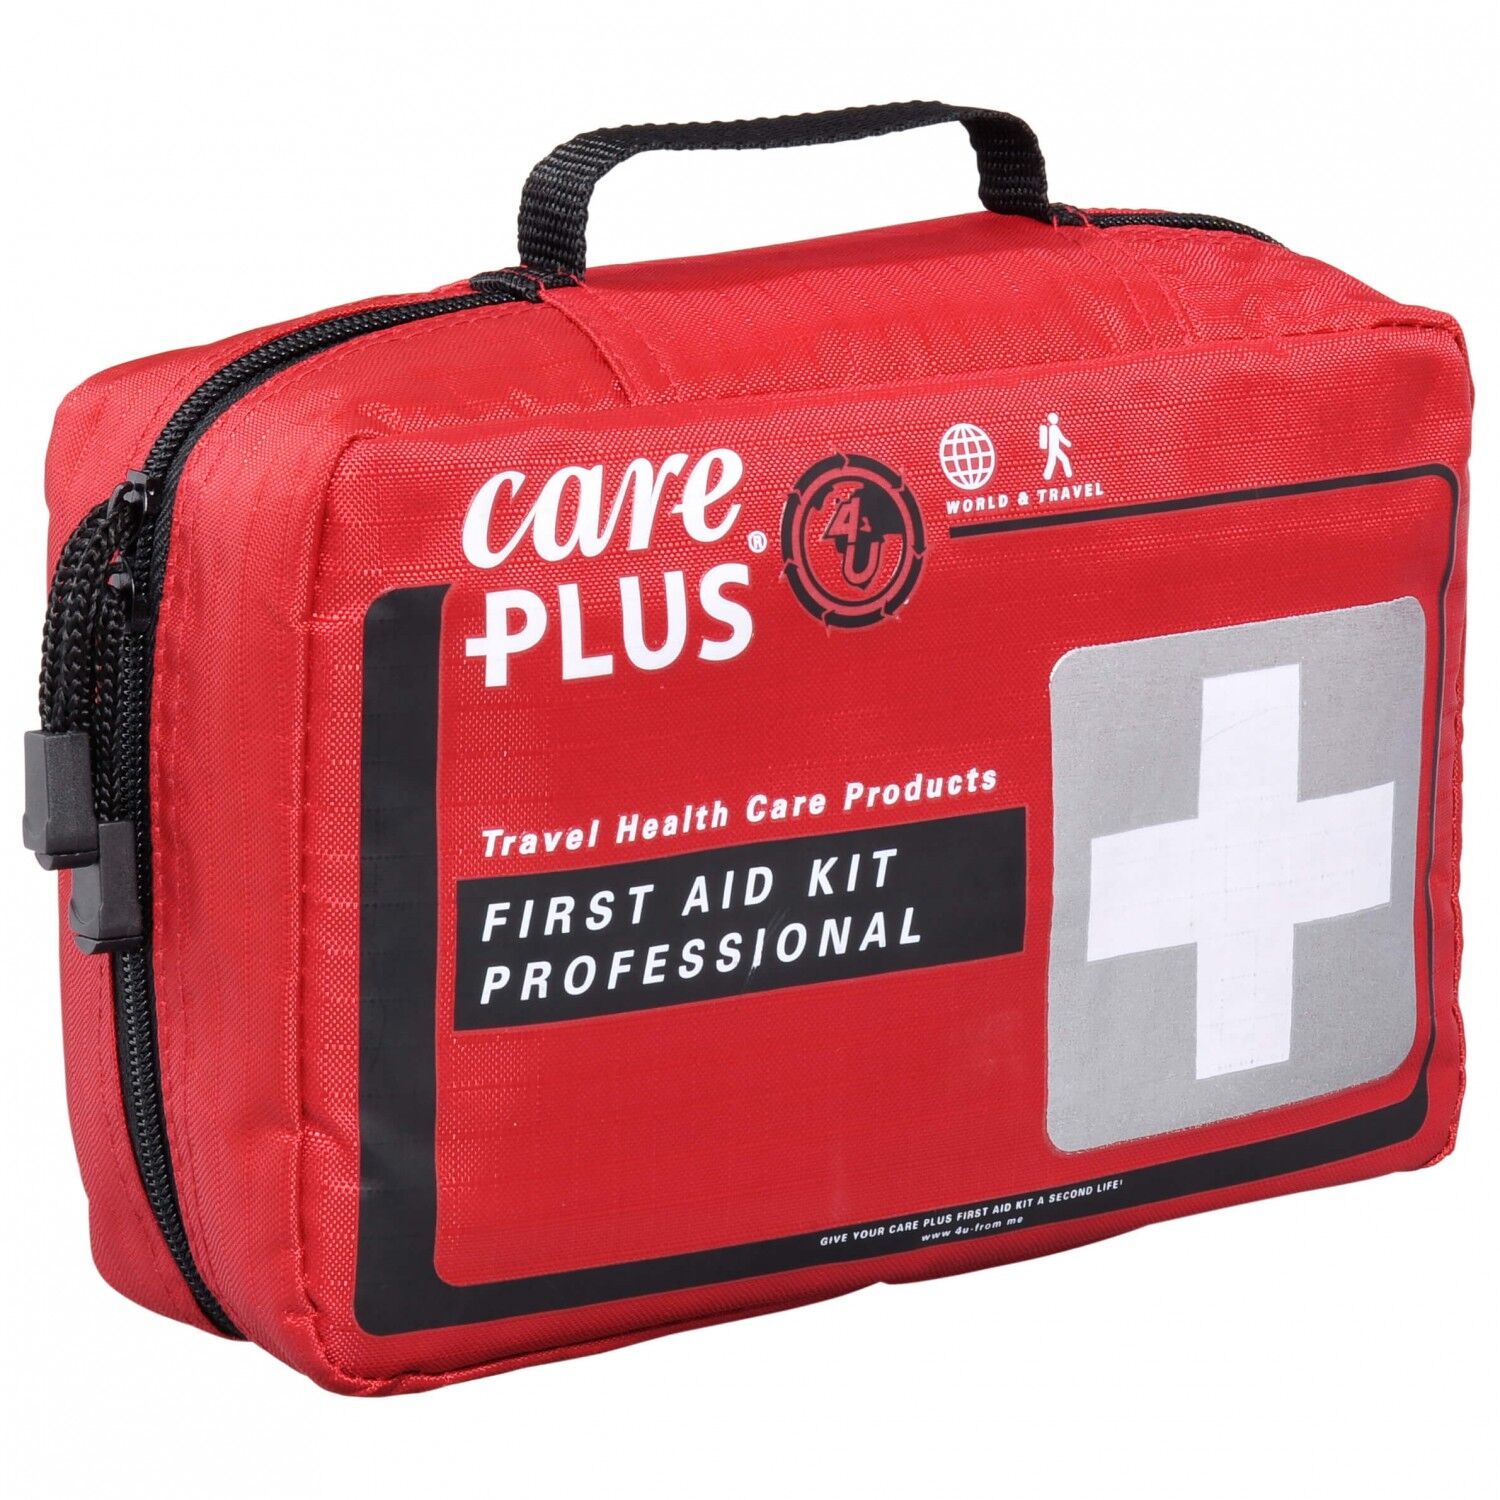 https://images.hardloop.fr/176030/care-plus-first-aid-kit-professional-kit-pronto-soccorso.jpg?w=auto&h=auto&q=80